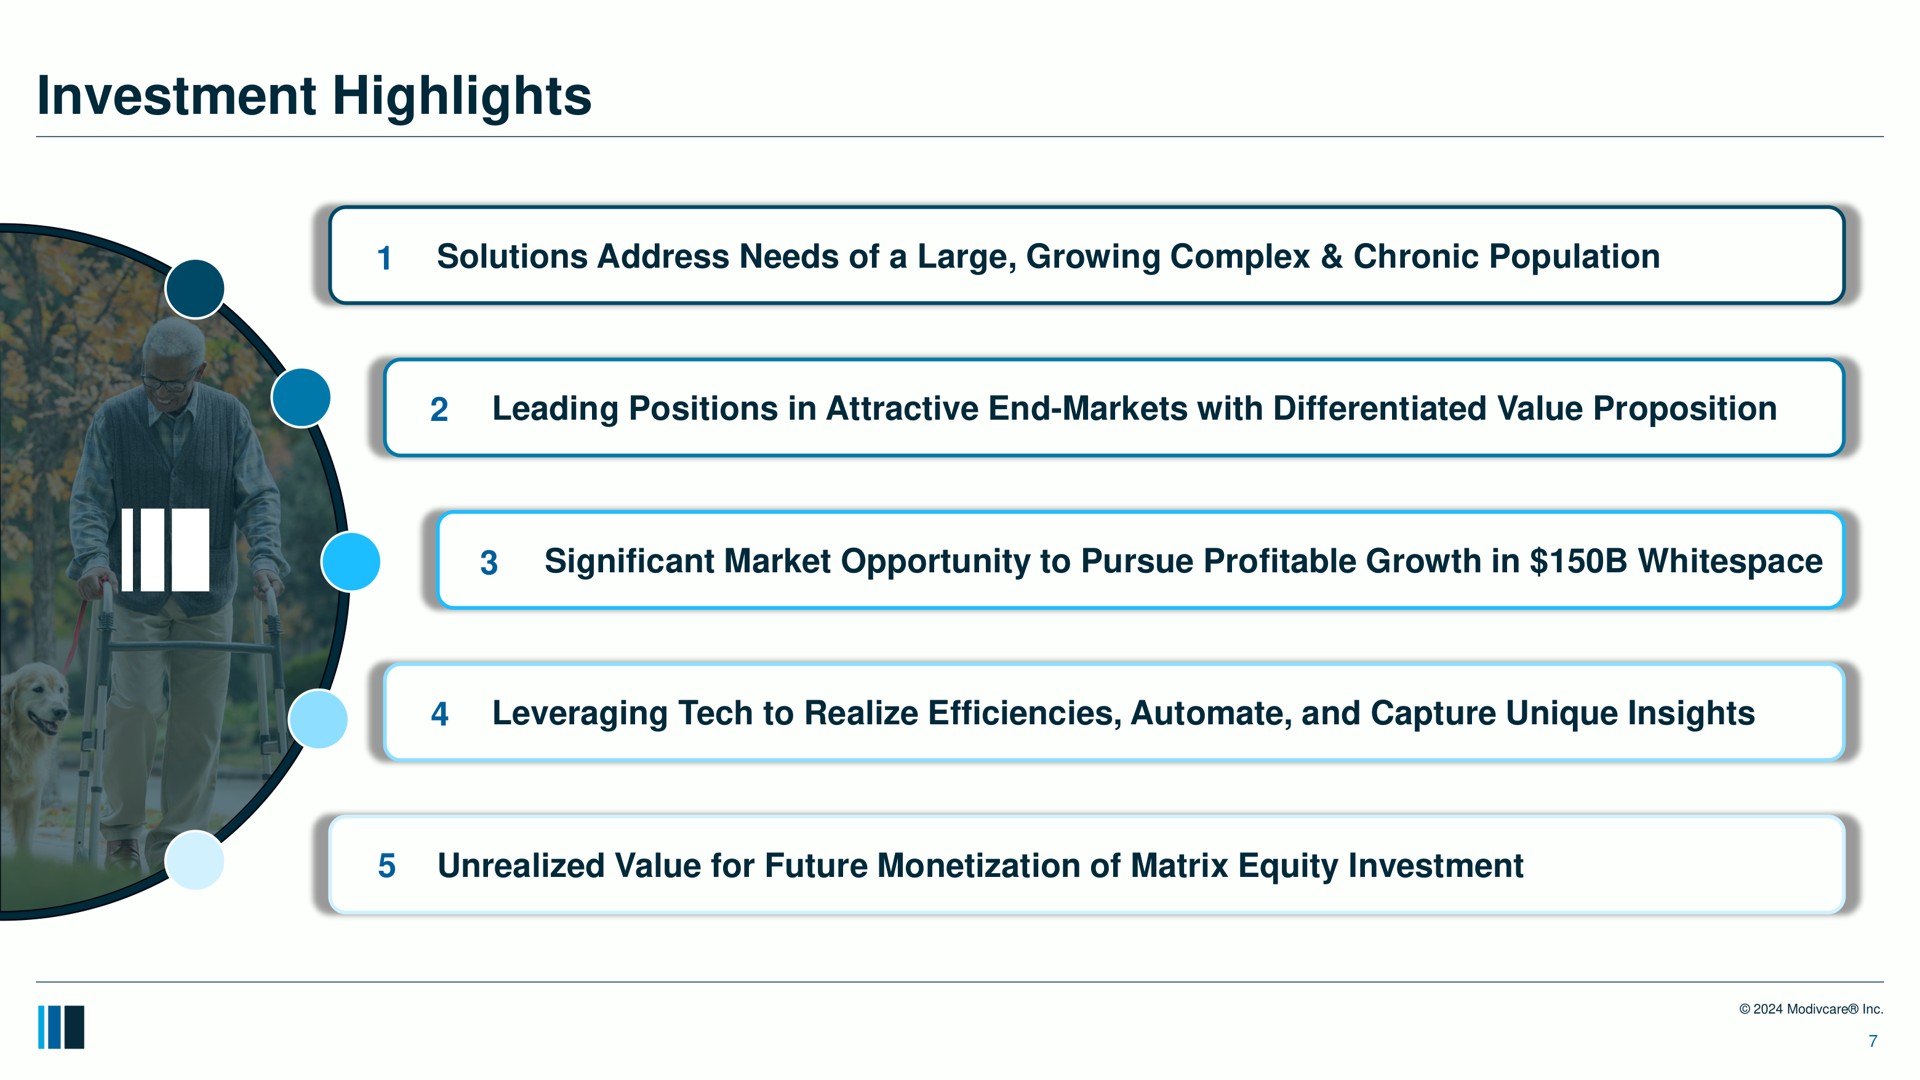 investment highlights solutions address needs of a large growing complex chronic population leading positions in attractive end markets with differentiated value proposition significant market opportunity to pursue profitable growth in leveraging tech to realize efficiencies and capture unique insights unrealized value for future monetization of matrix equity | ModivCare